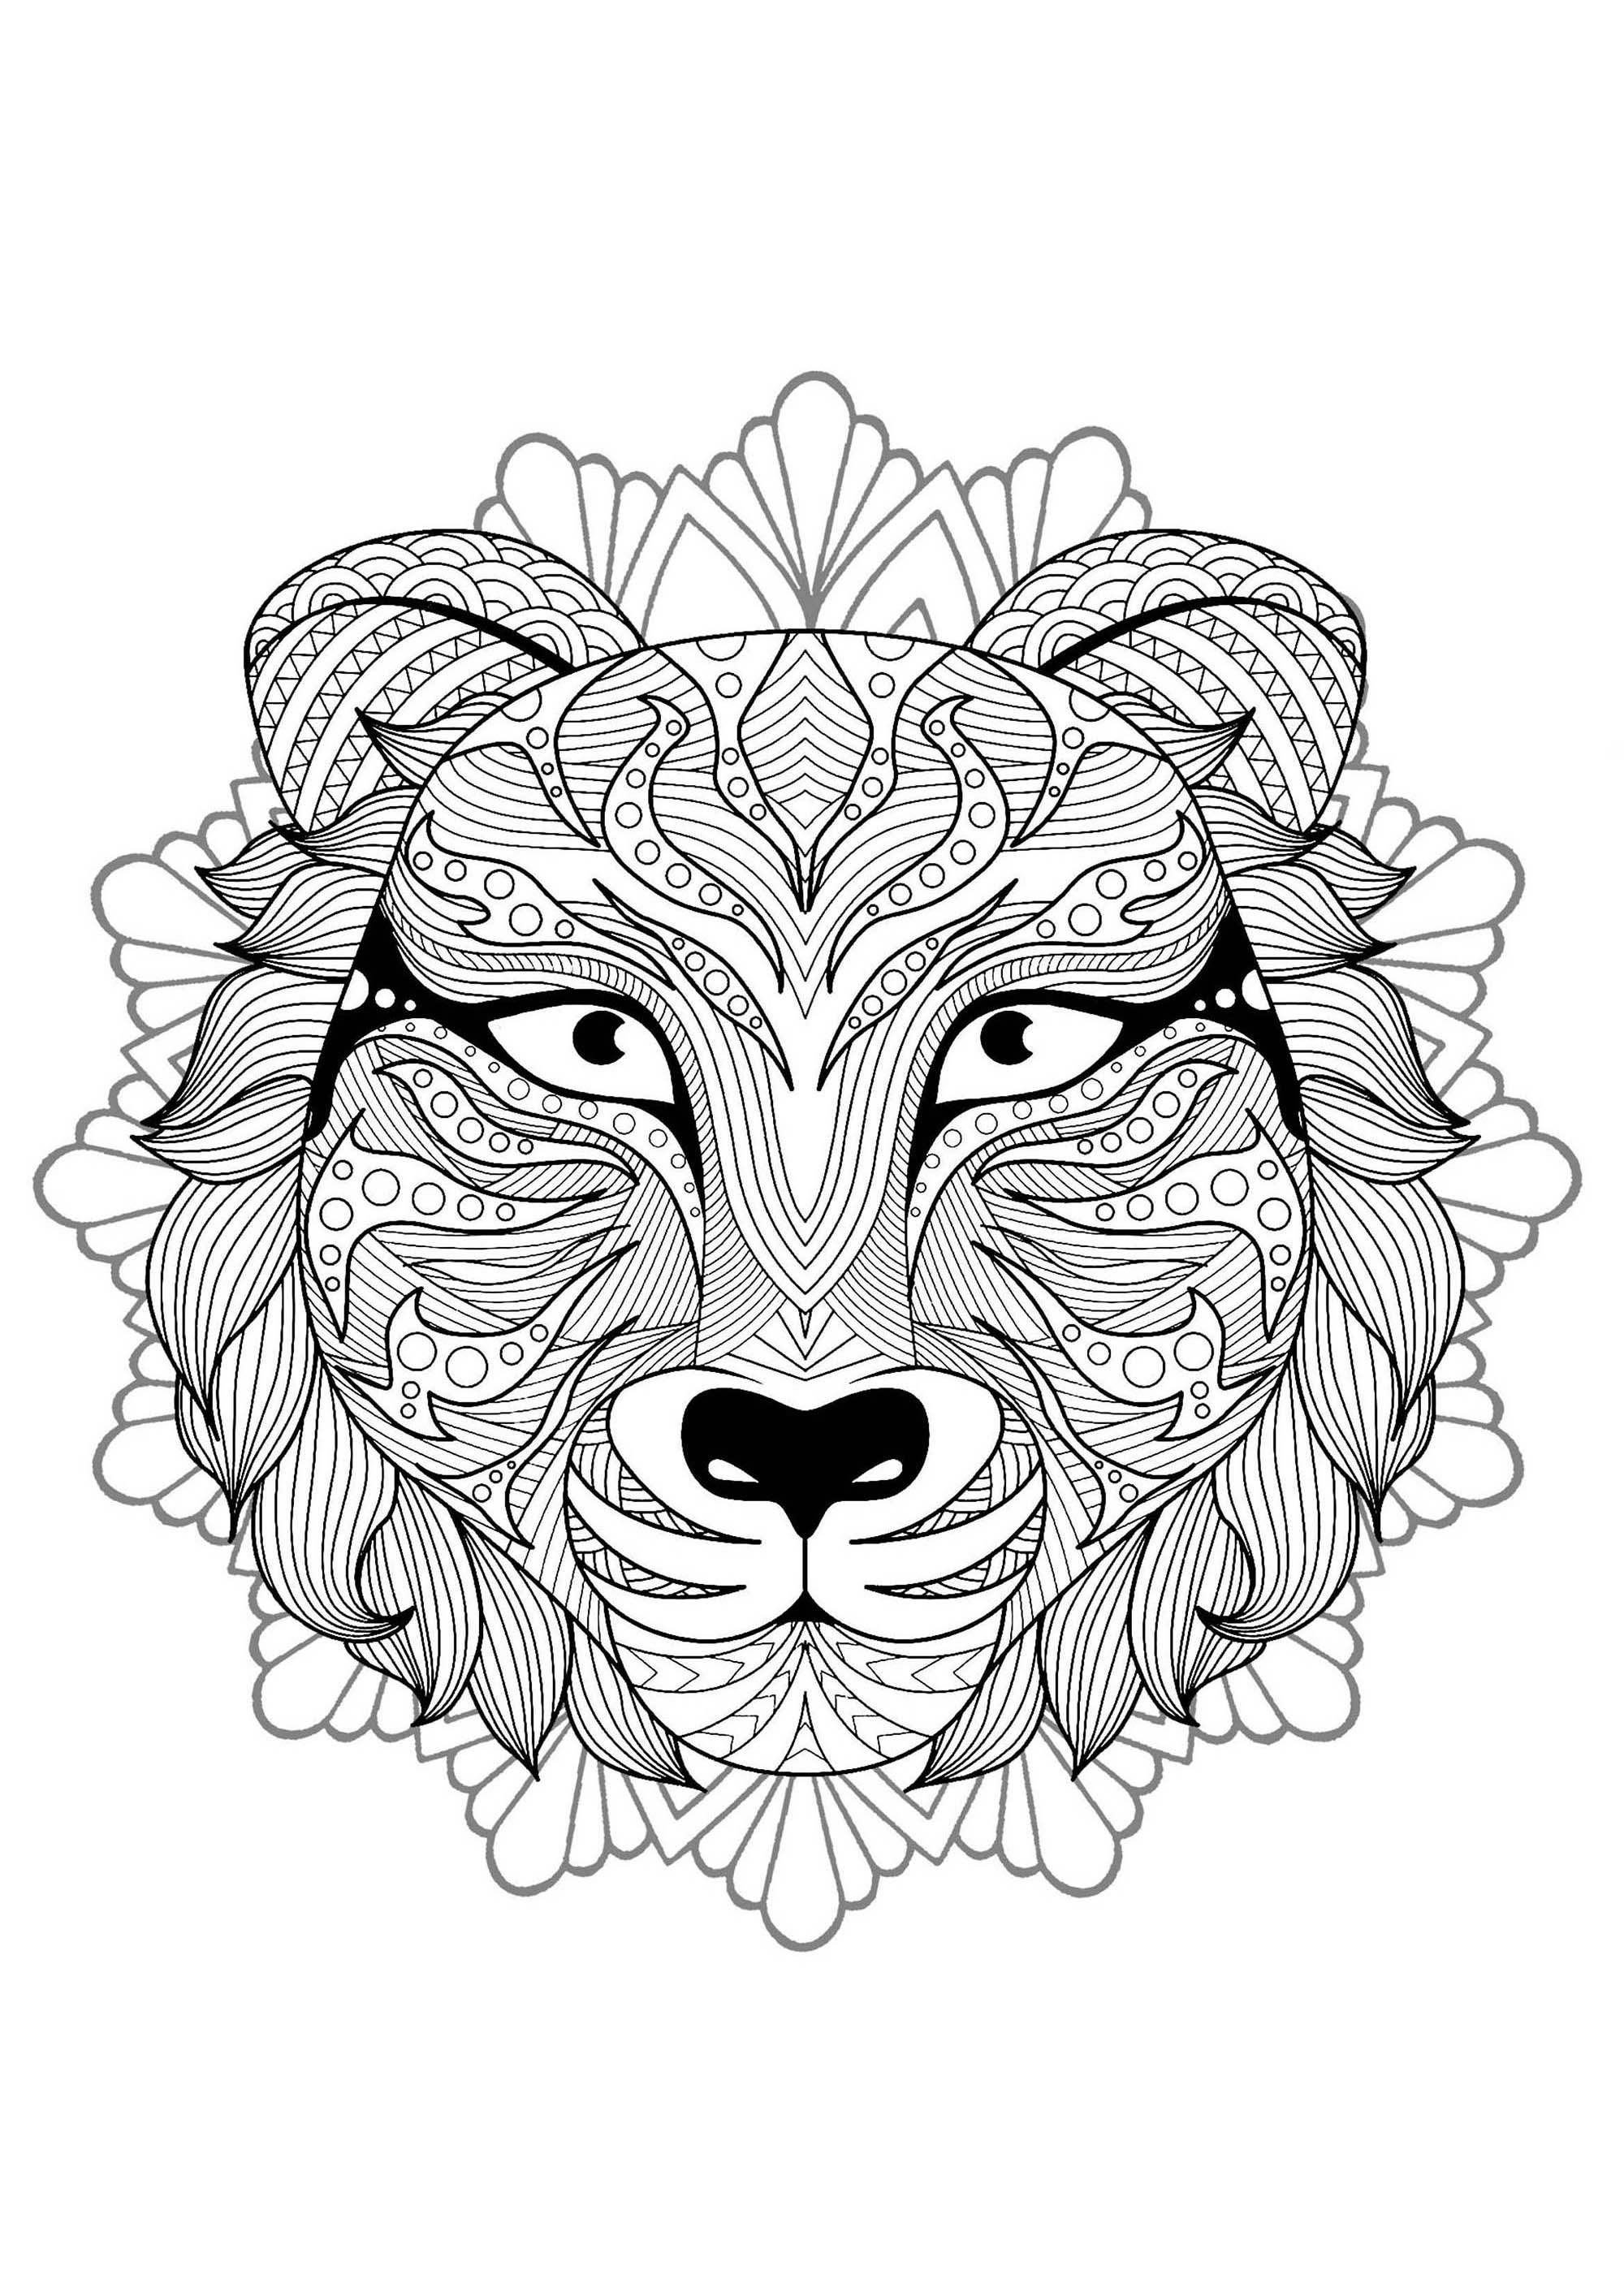 Tiger head in a difficult Mandala. Prepare your pencils and pens to color this incredible Mandala coloring page with little details. It can sometimes be even more relaxing when coloring and passively listening to music : don't hesitate to do it !